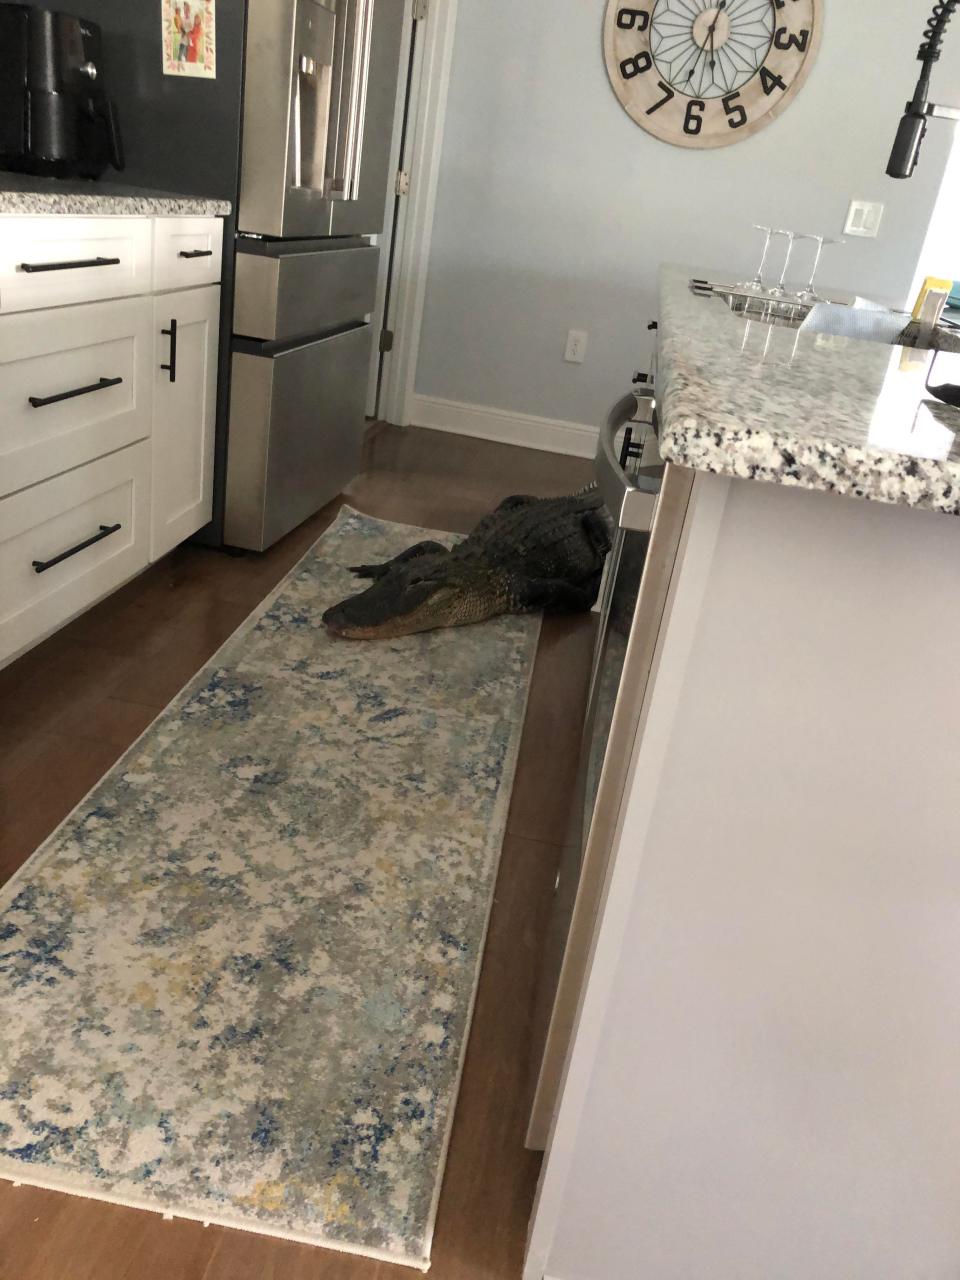 Alligator 'creeping' into kitchen. The alligator wandered into Mary Hollenback's home in Venice, Florida on March 28, 2024.